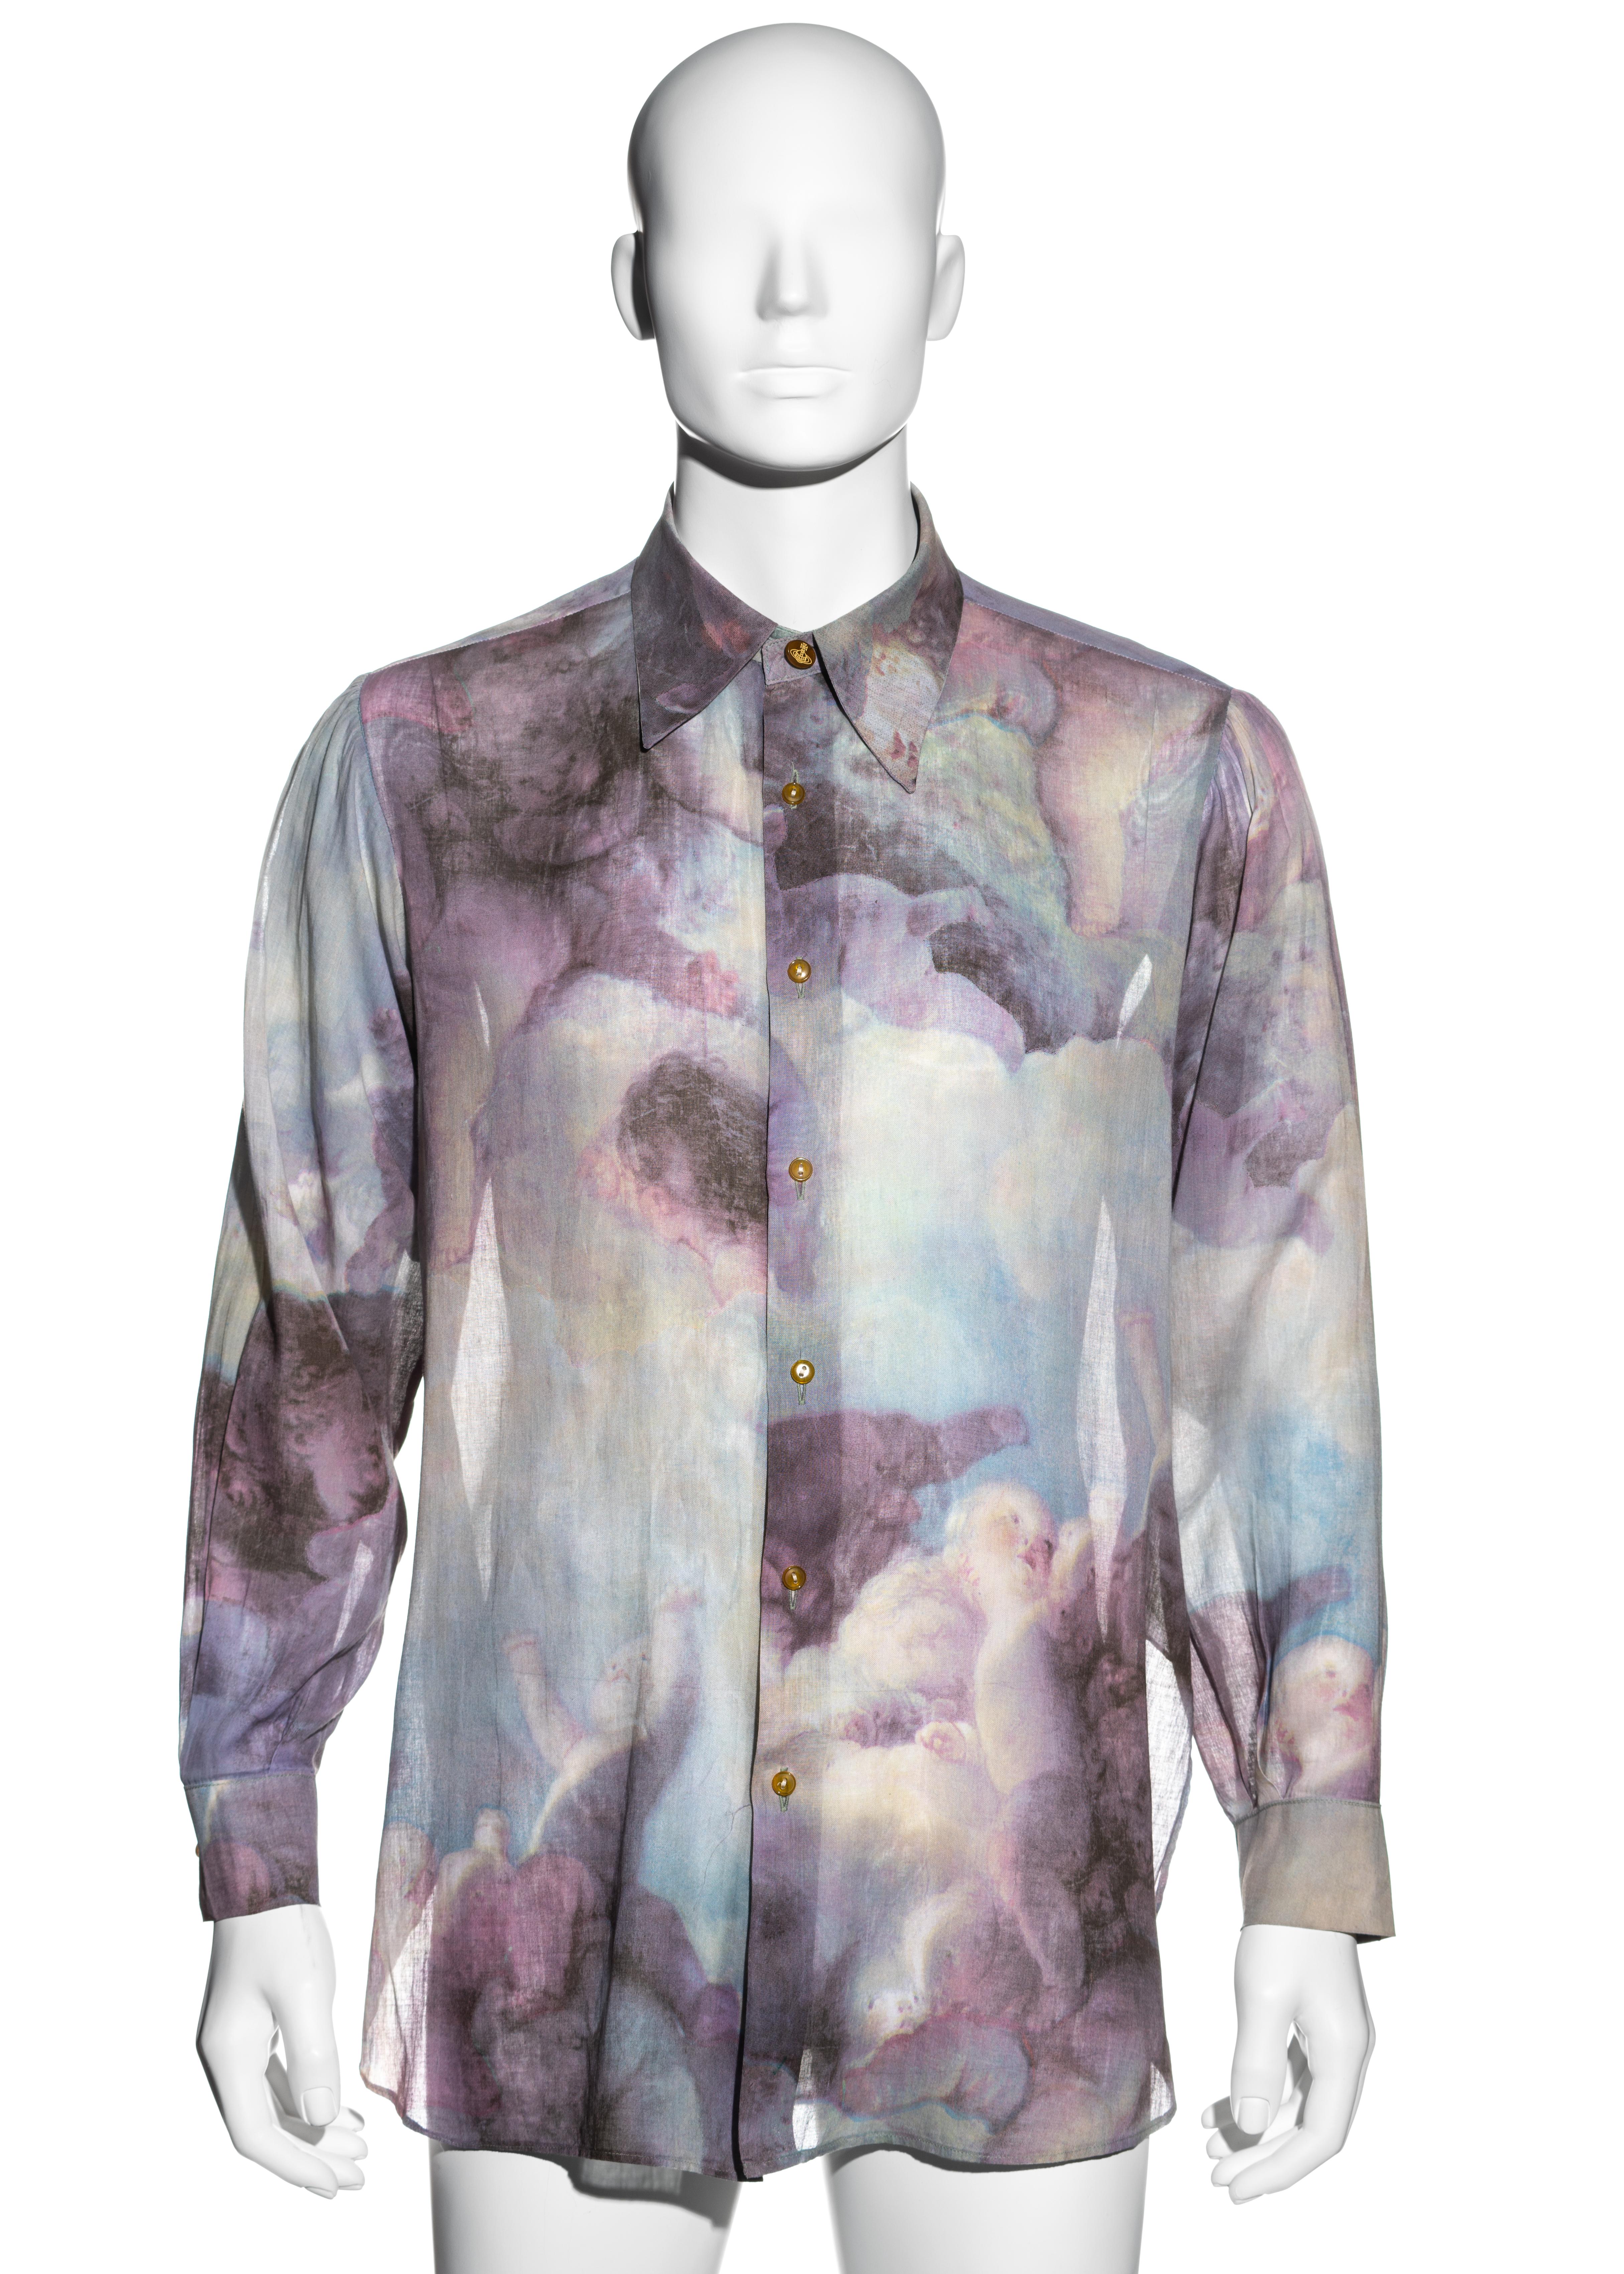 ▪ Vivienne Westwood Men's voile shirt 
▪ 100% Cotton 
▪ Print reproduced from 'A Swarm of Cupids' by Jean-Honoré Fragonard (1765-67)
▪ Orb etched buttons on collar and cuffs 
▪ Size 42
▪ Fall-Winter 1992